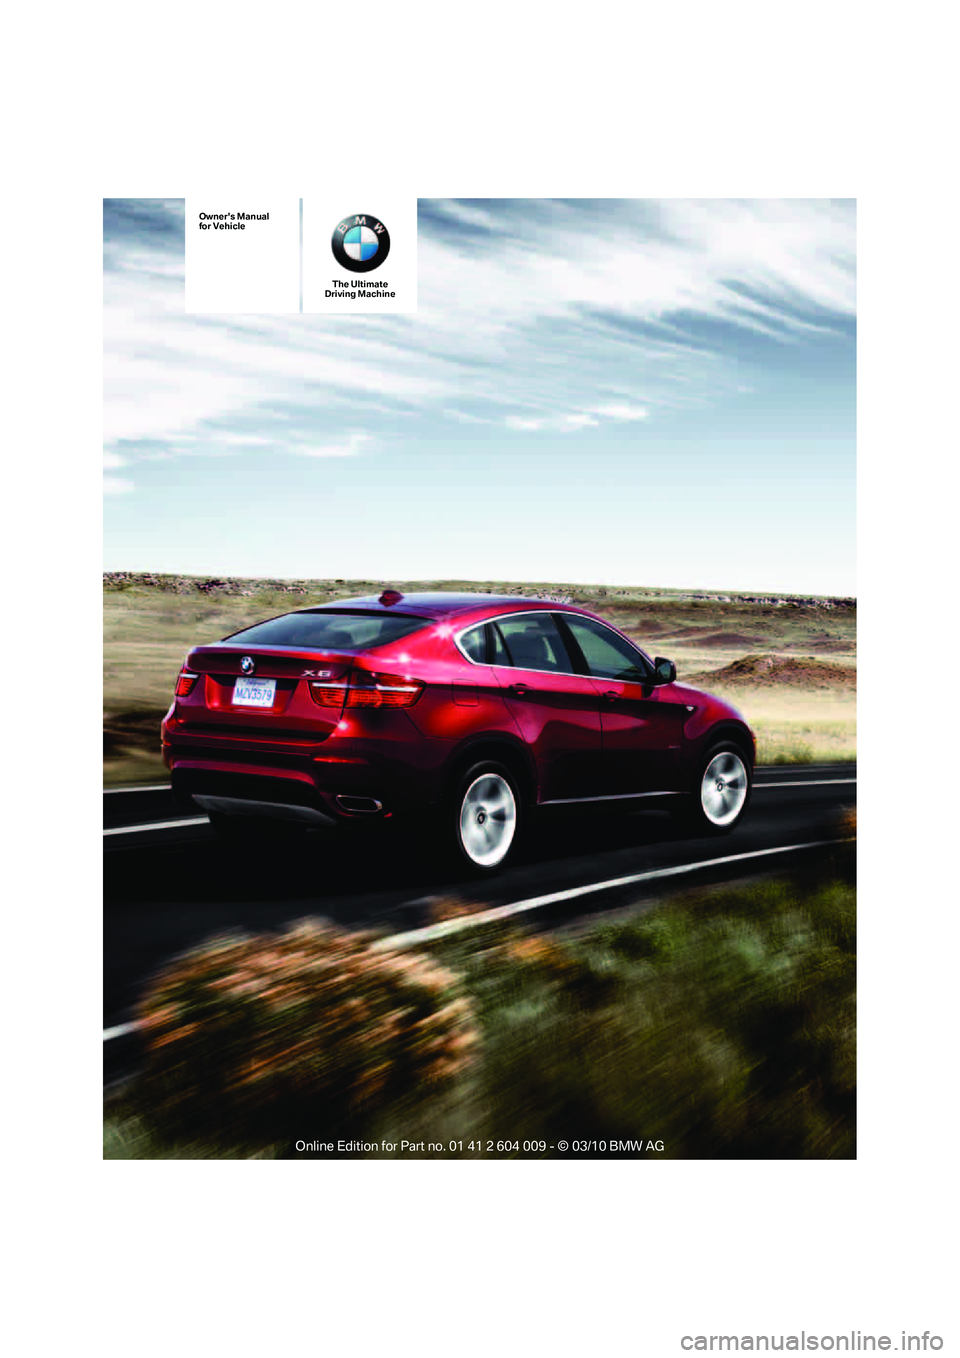 BMW X5 XDRIVE35D 2011  Owners Manual The Ultimate
Driving Machine
Owners Manual
for Vehicle 